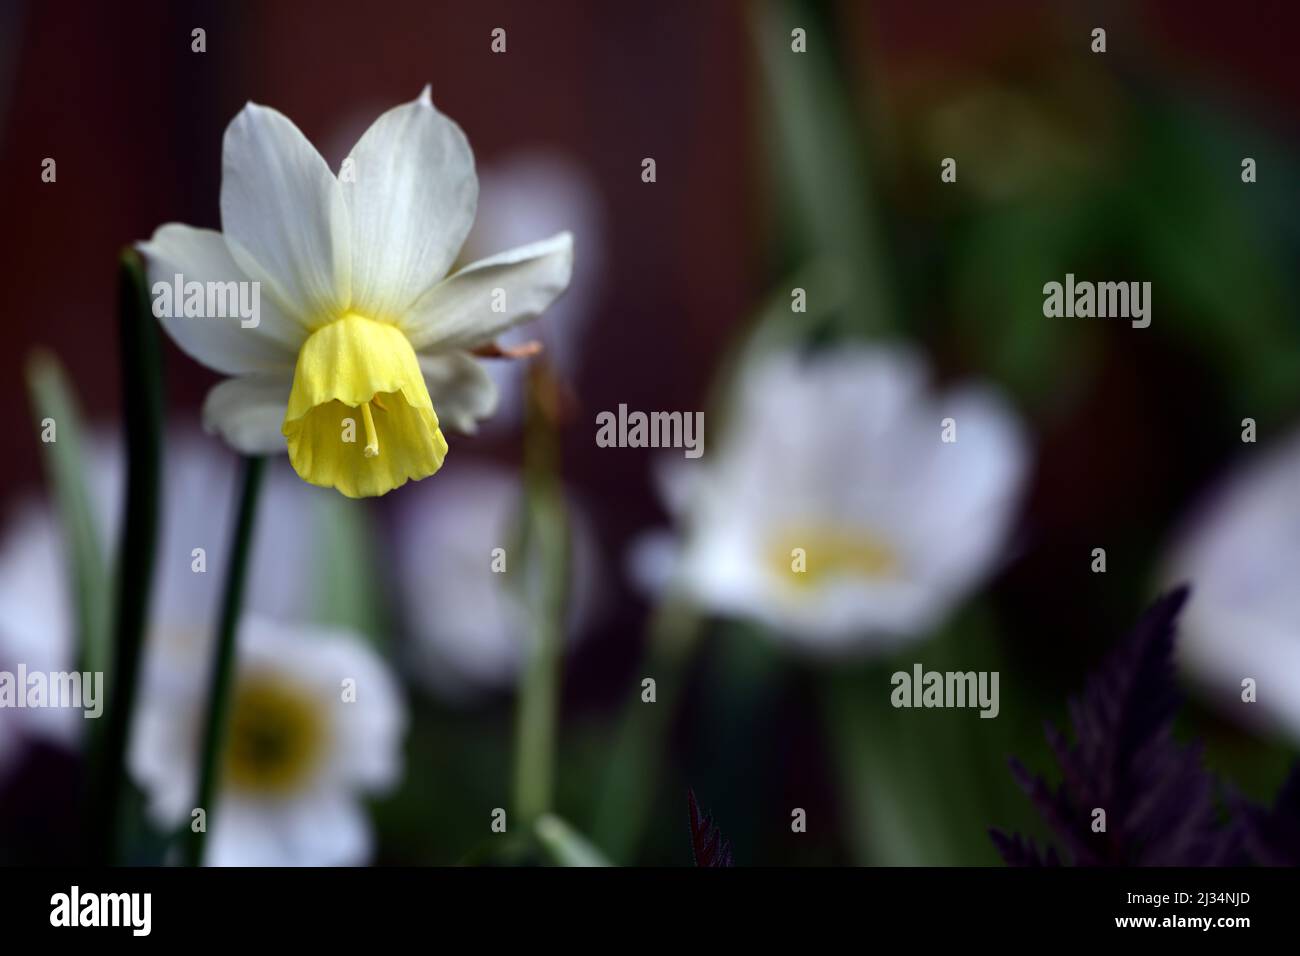 narcissus sailboat,Miniature Narcissus,Miniature Narcissi,Pale yellow and creamy white flowers,pale yellow flower,spring in the garden,RM floral Stock Photo